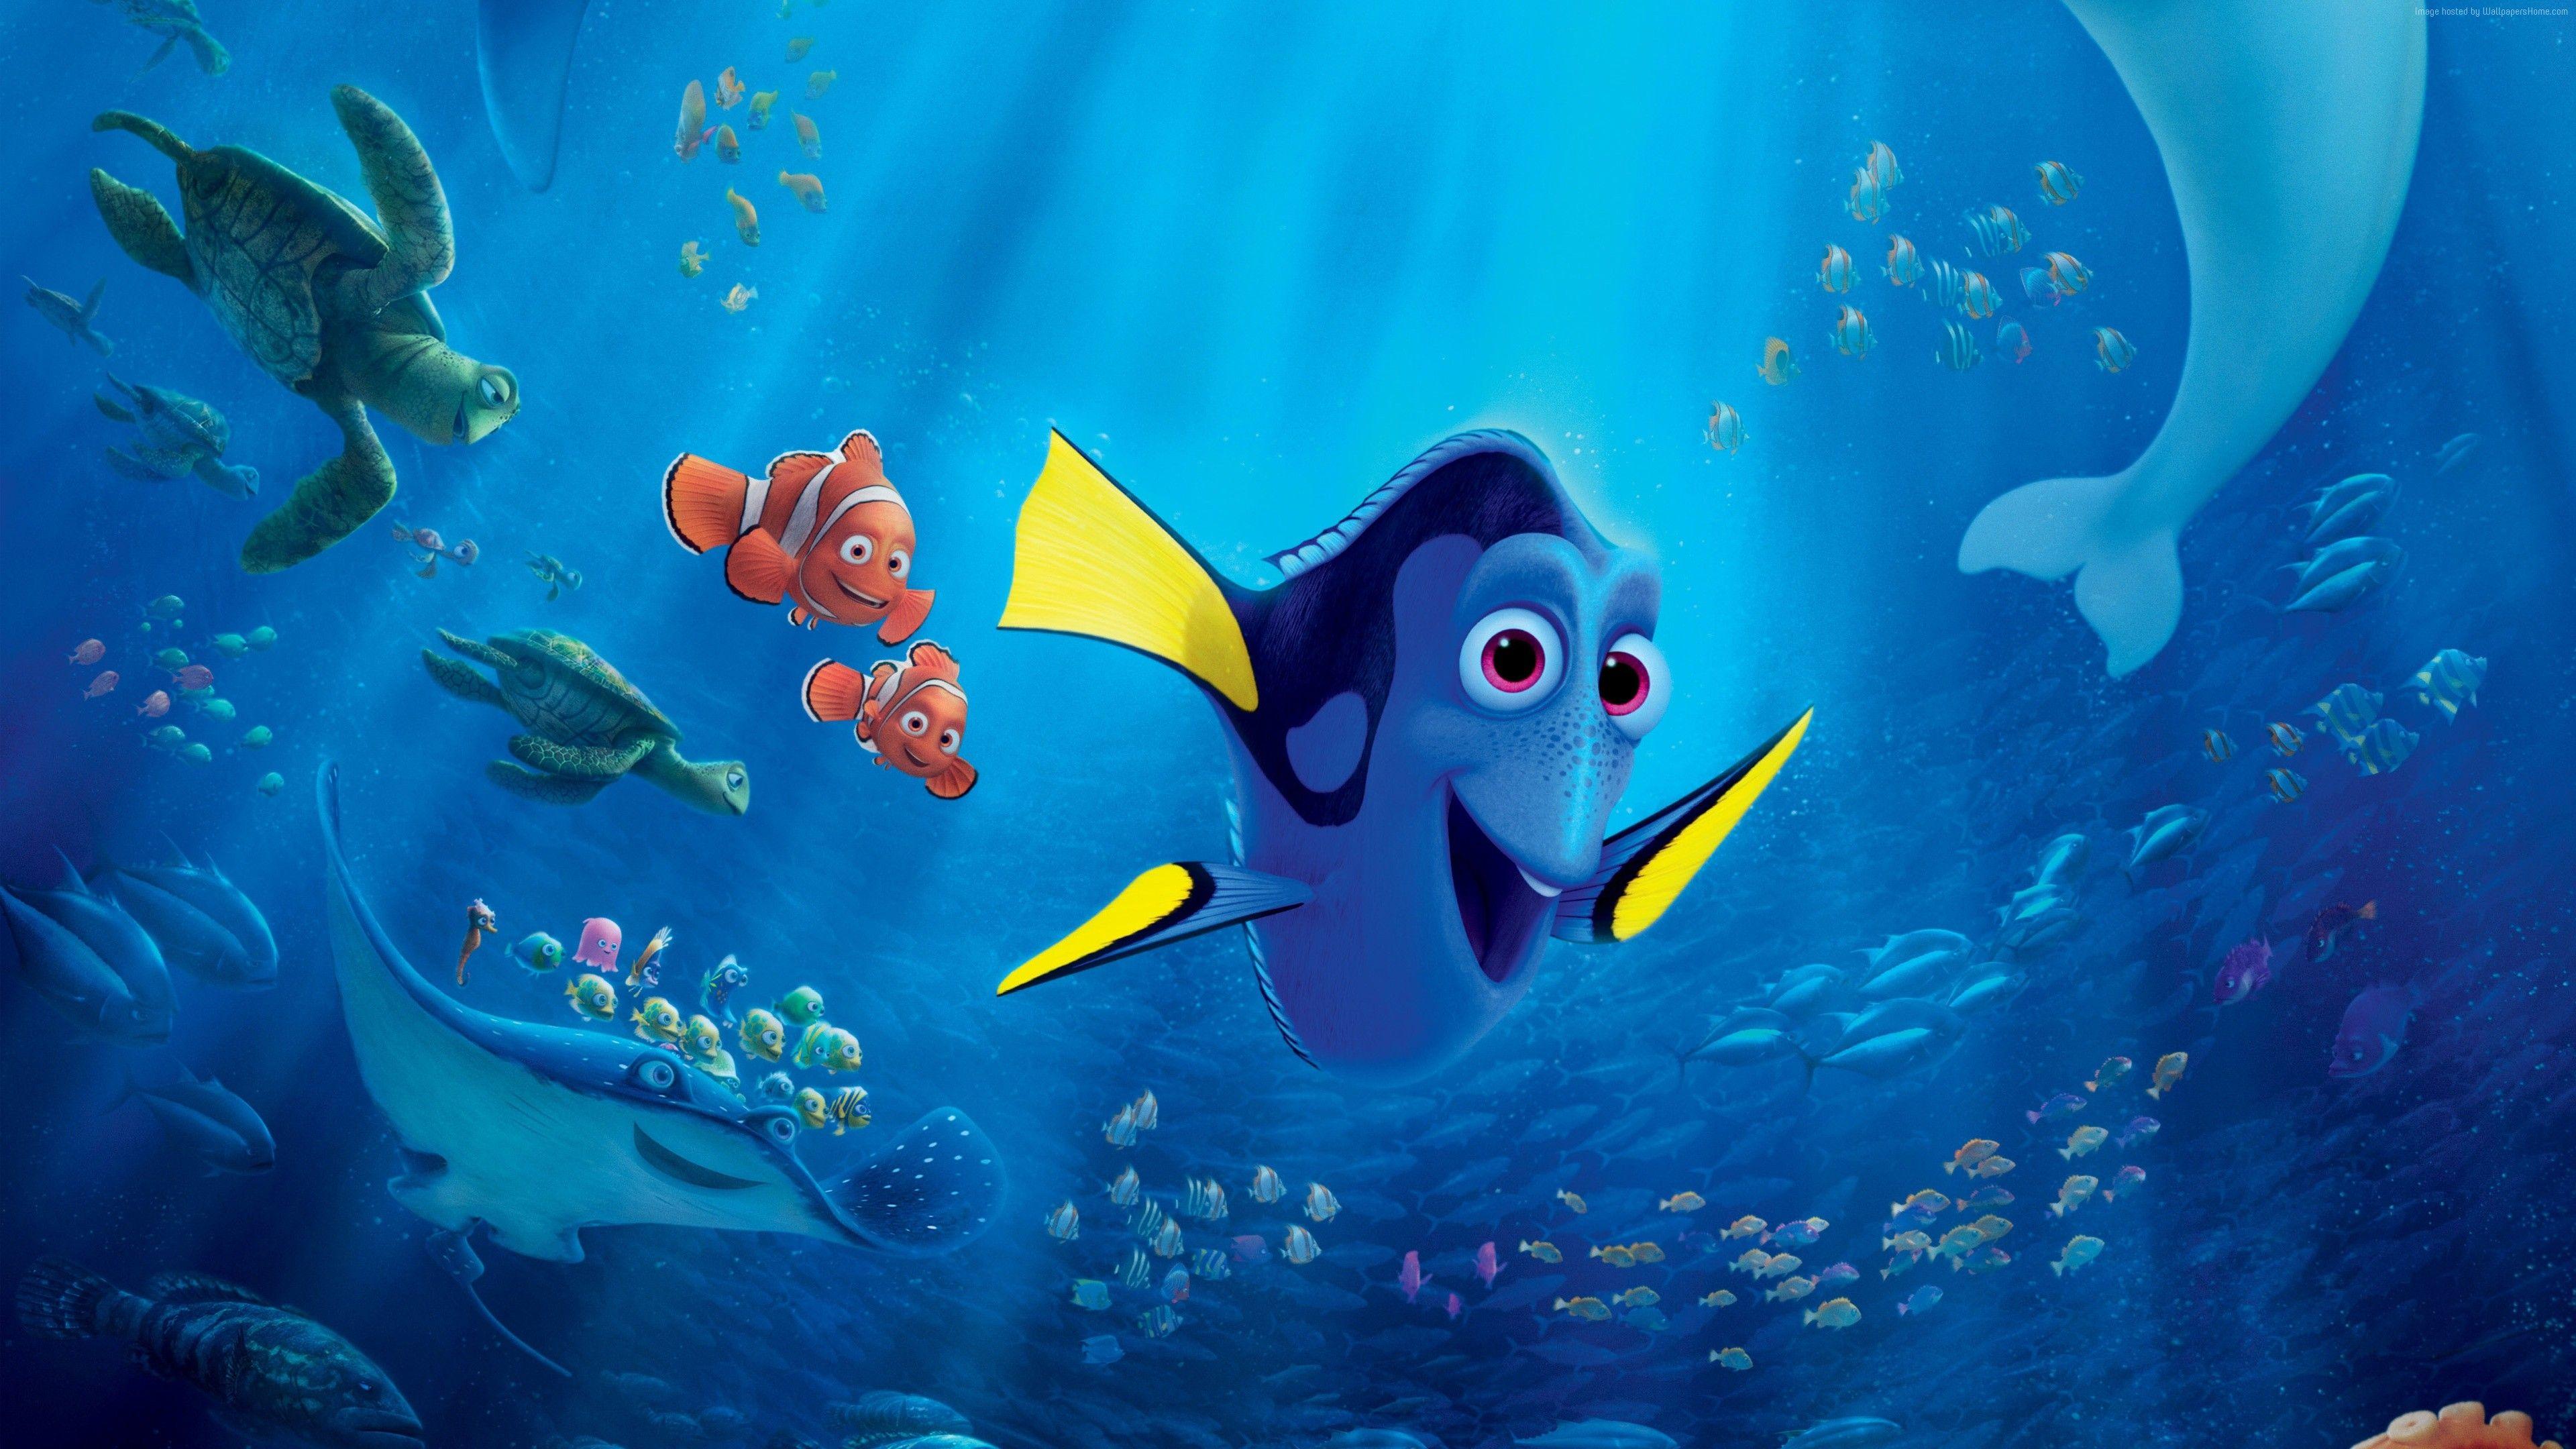 Finding Dory Wallpaper, Movies: Finding Dory, hank, nemo, fish